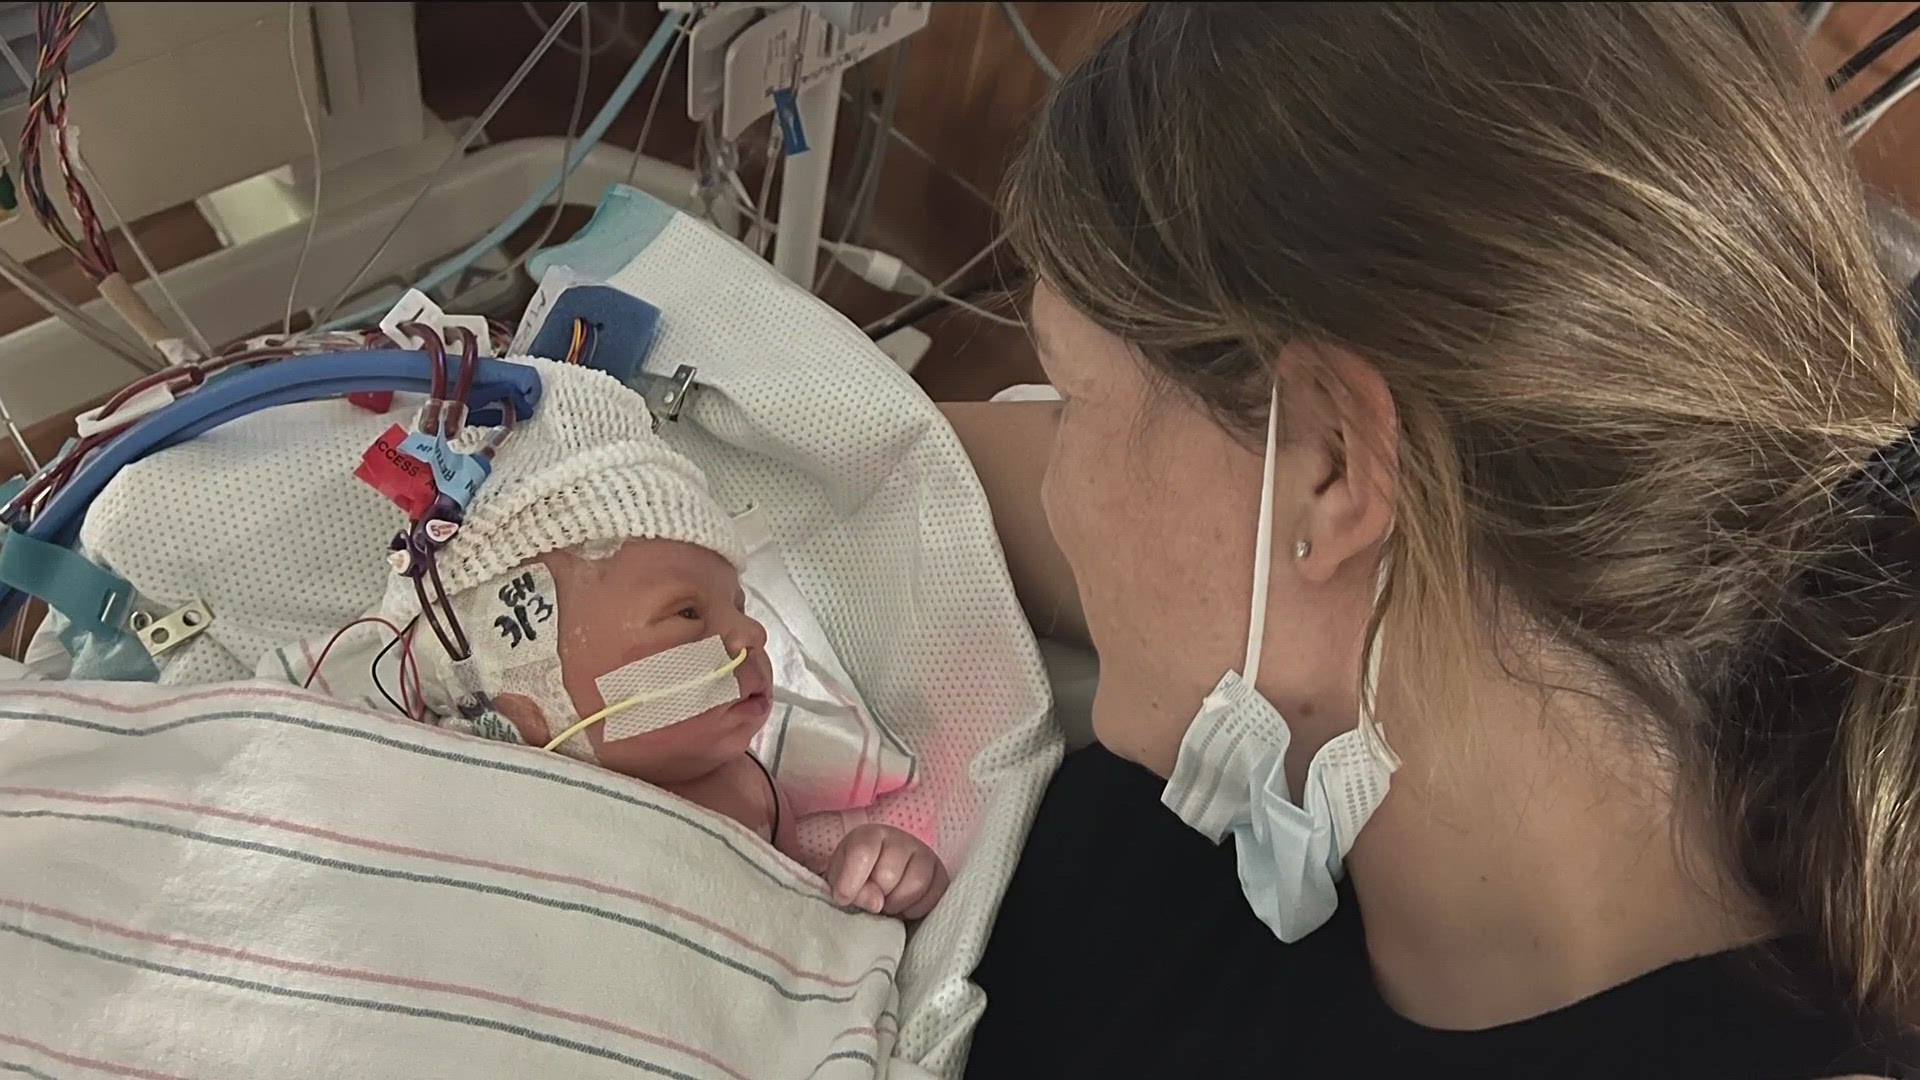 An Atlanta family shared their story about their baby's rare genetic disorder.